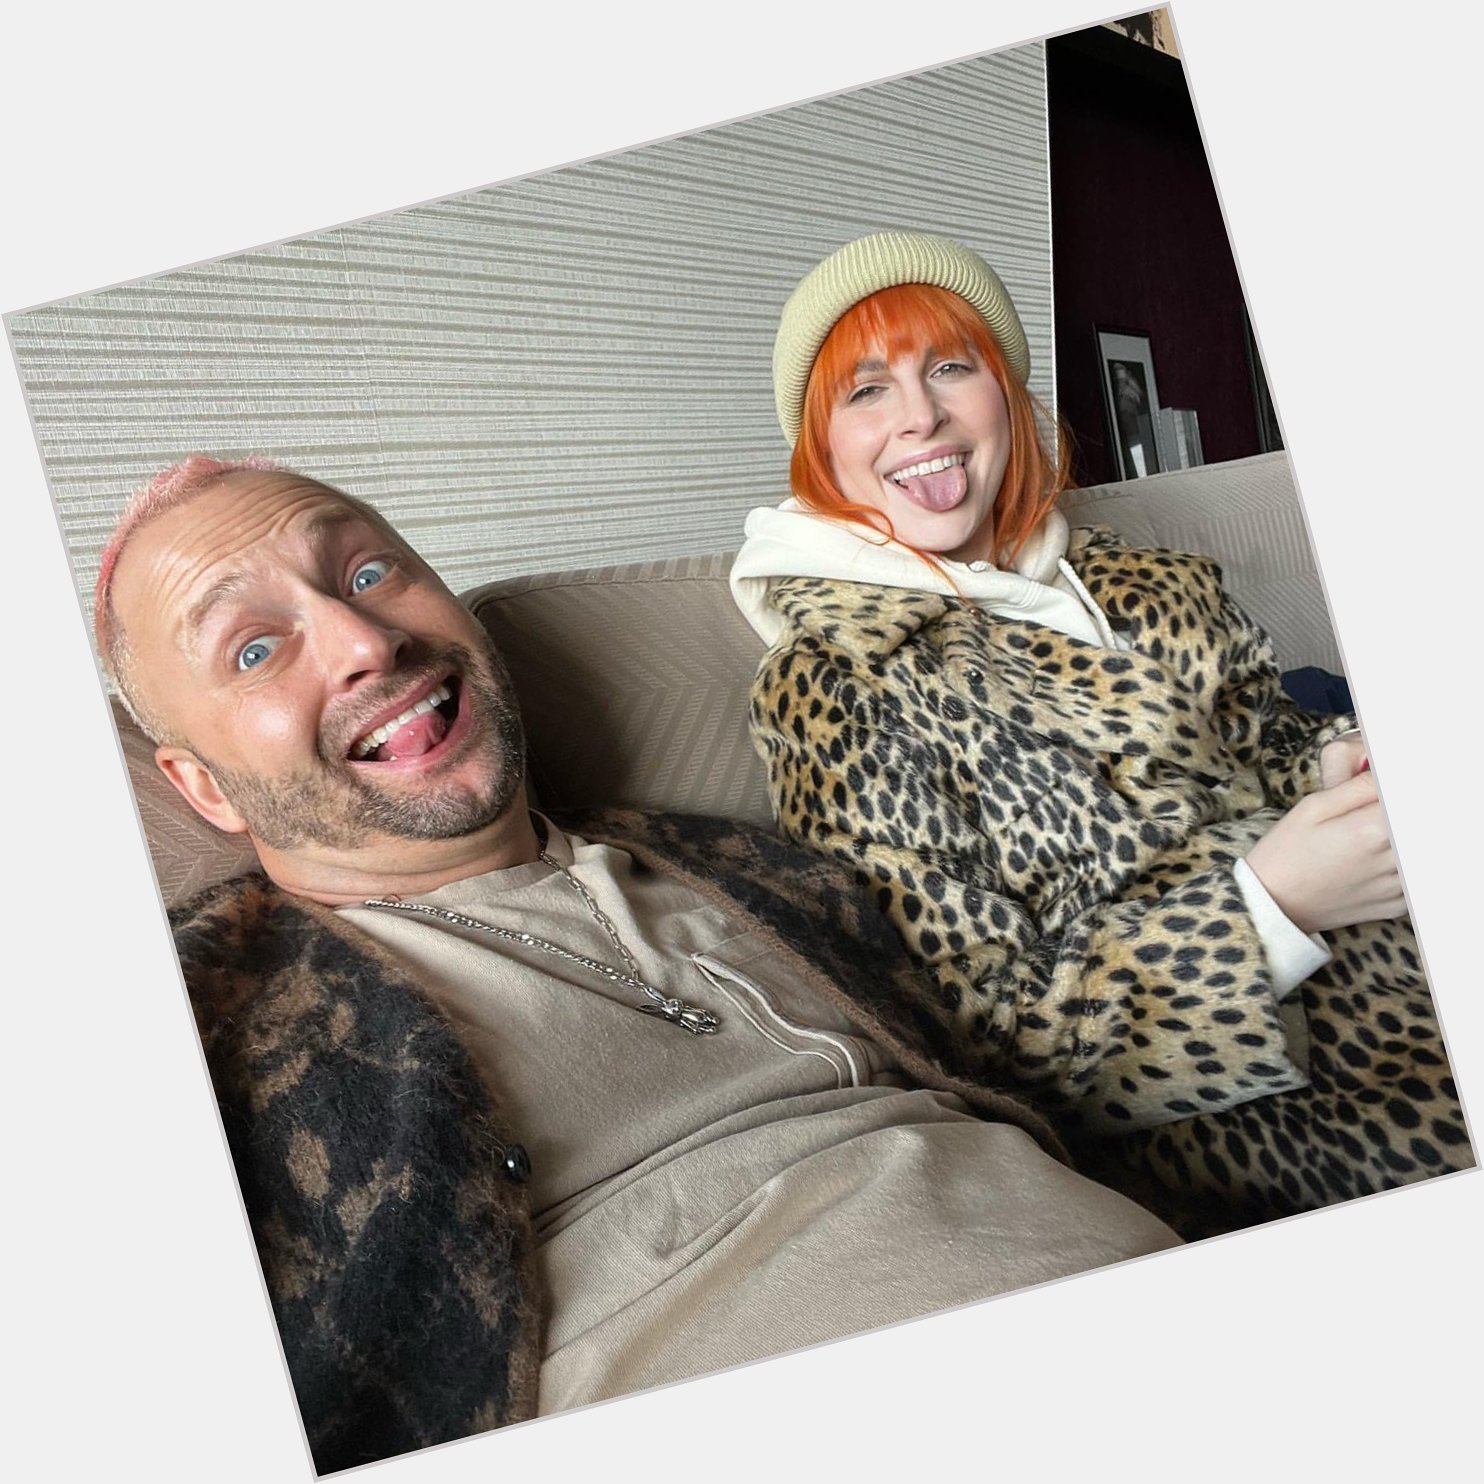 New photo of Hayley Williams and Brian: Happy birthday to my best friend dang bitch you getting old! 